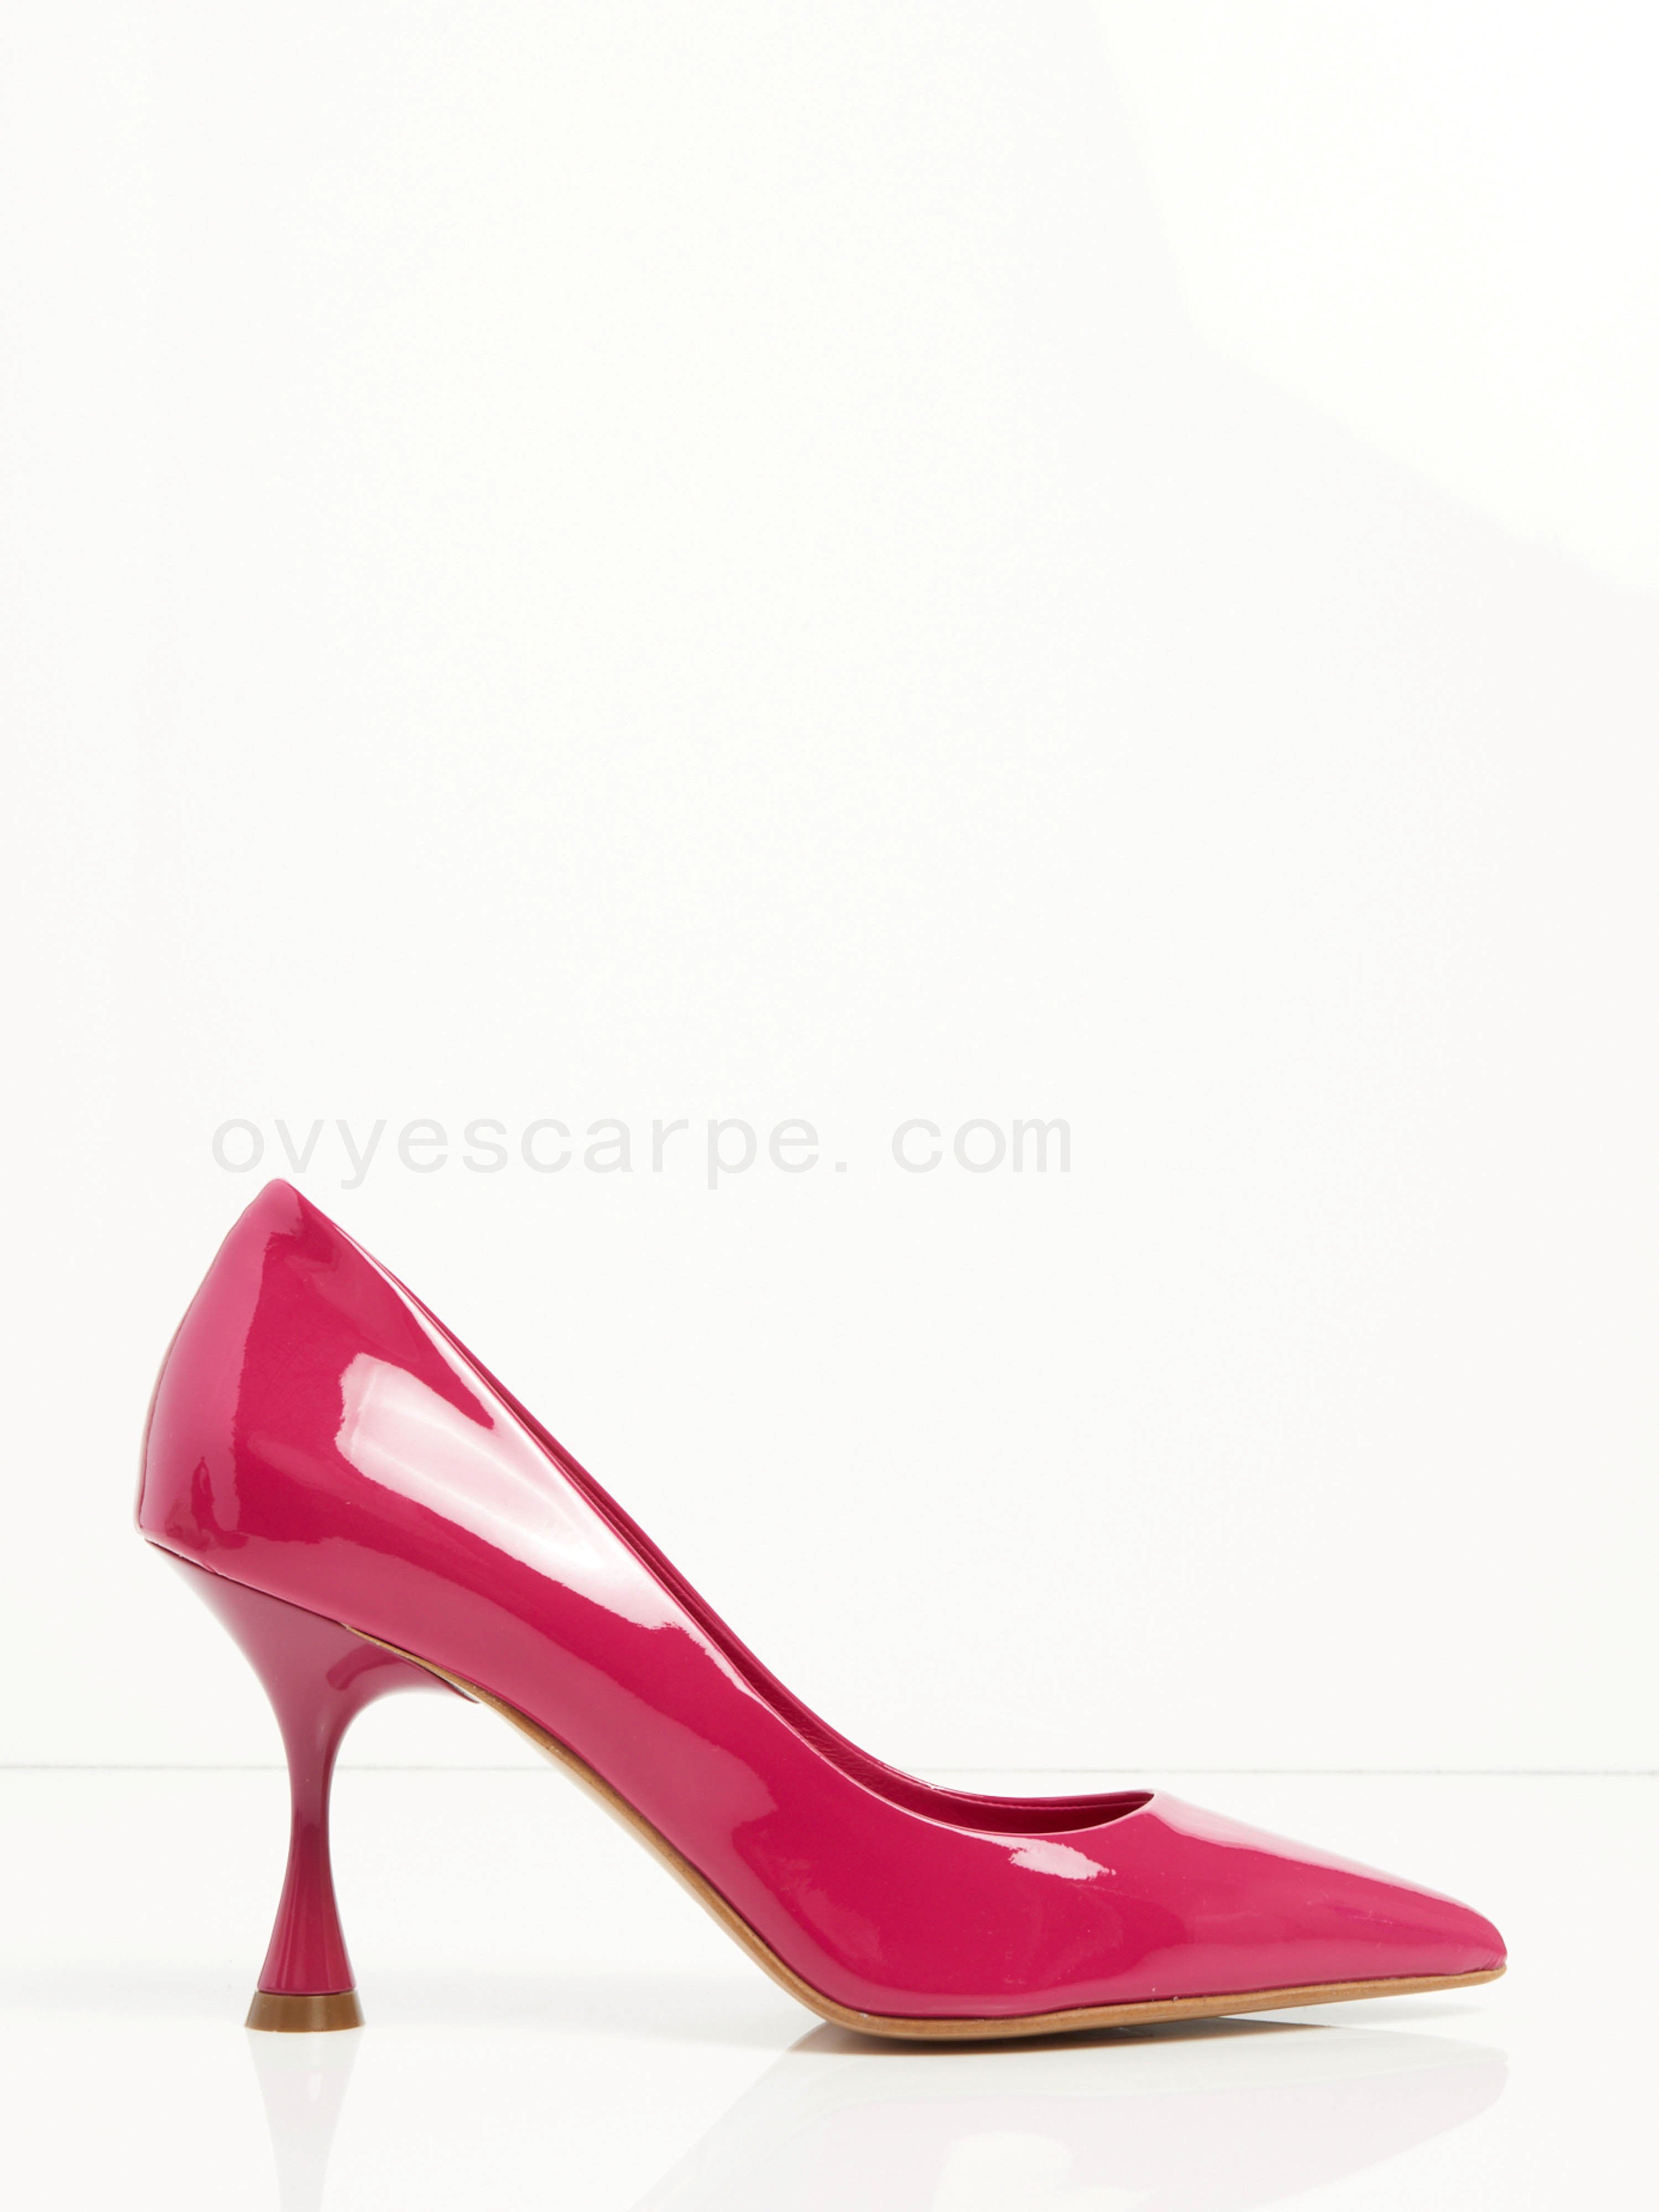 Outlet Online Patent Leather Pumps F08161027-0474 Migliori